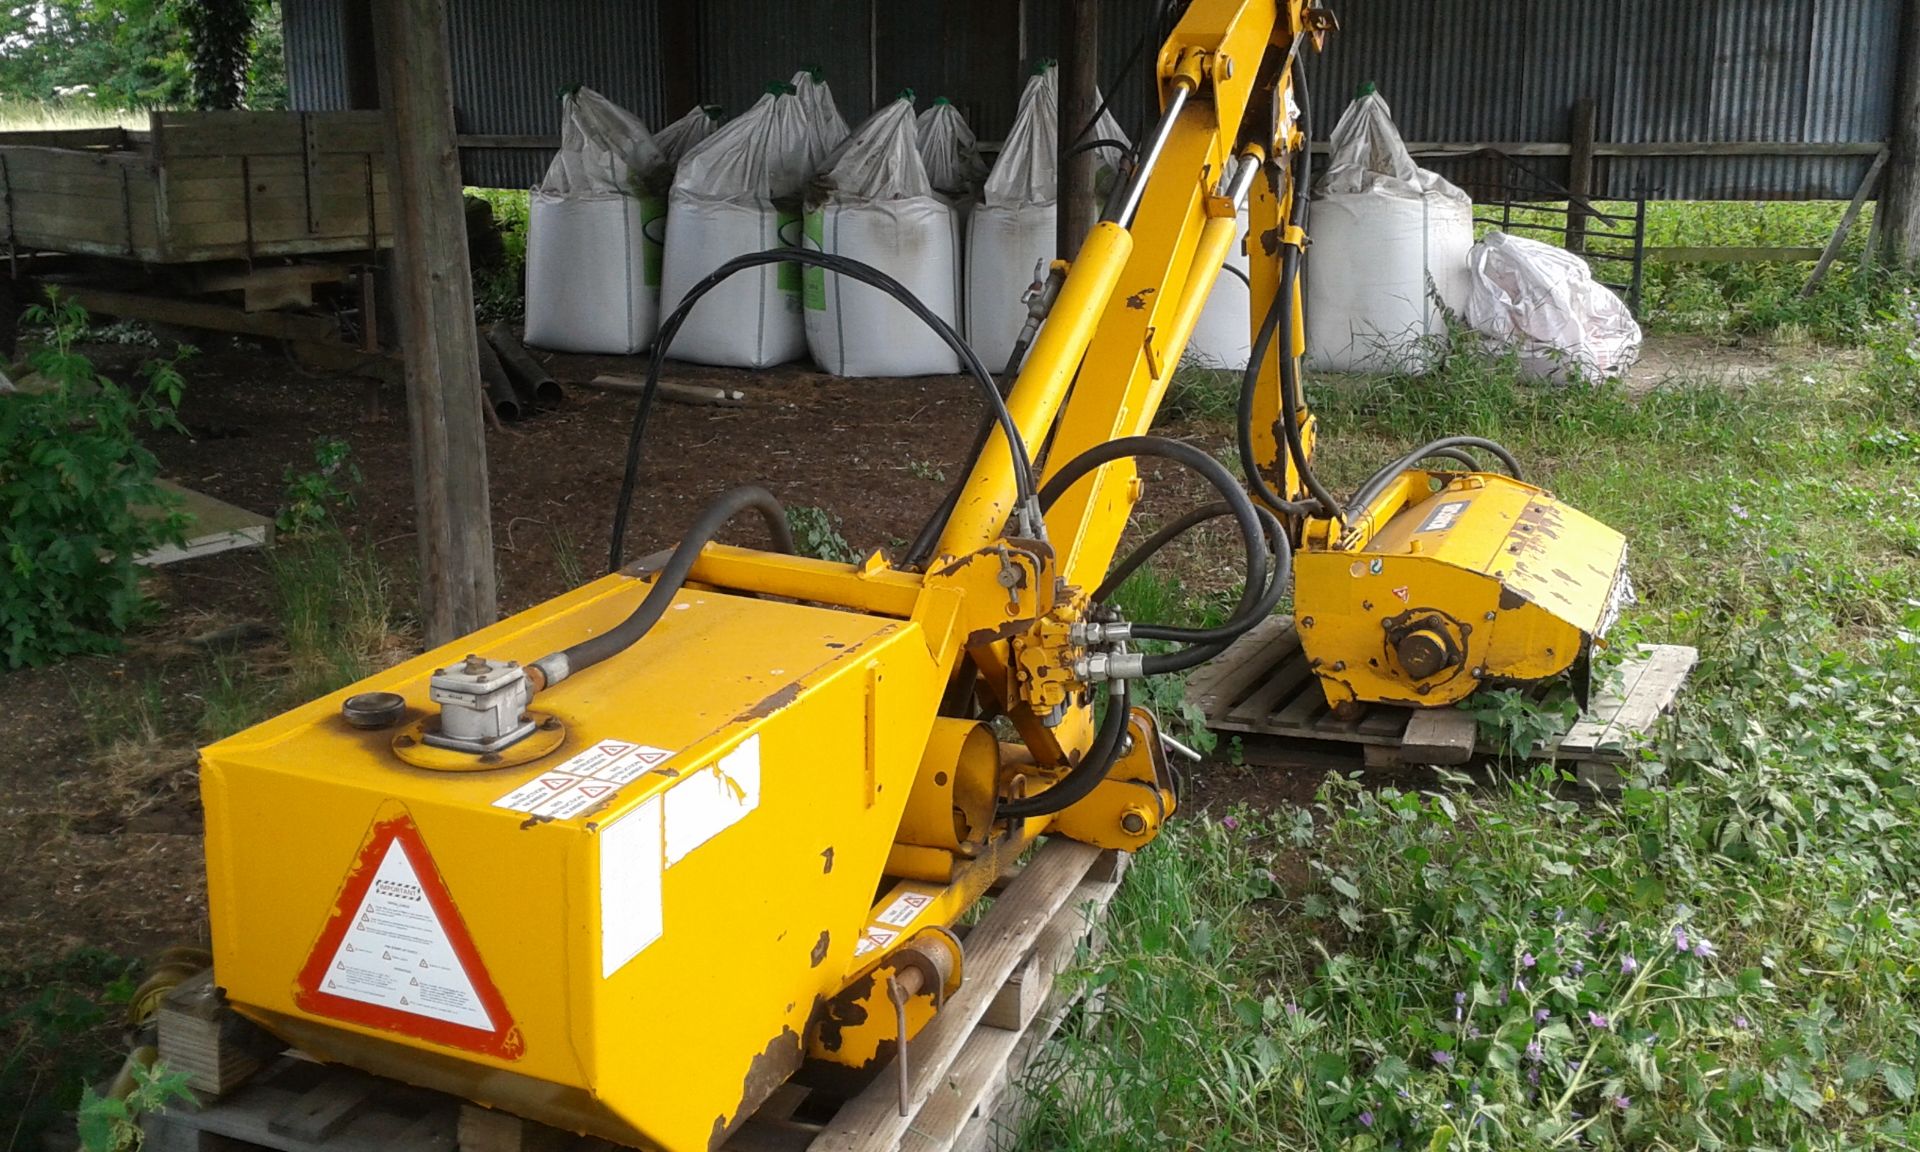 Bomford B457 FC LH Hedgecutter with cable controls - Location - Waterbeach, Cambs - Image 3 of 3